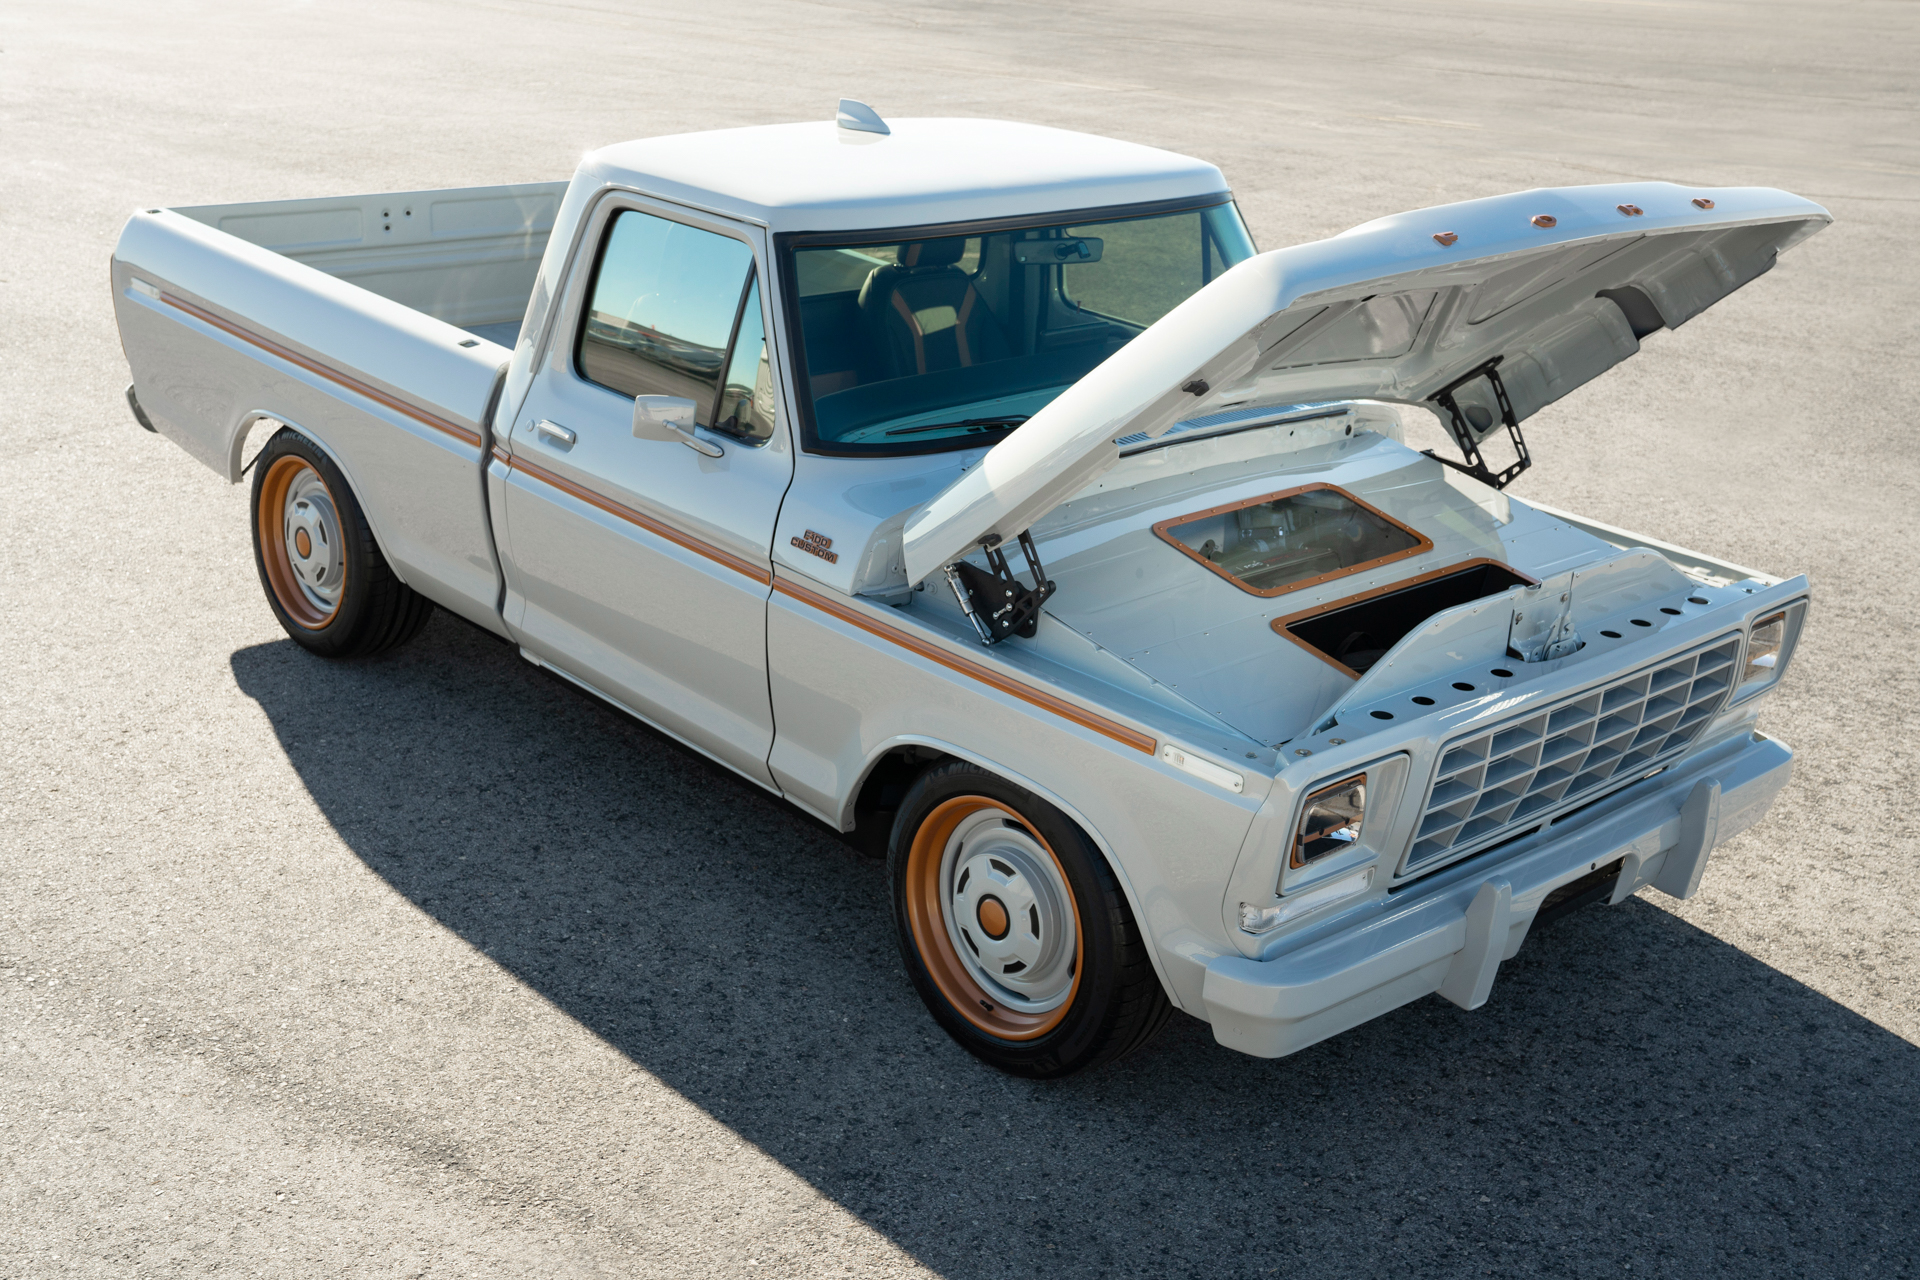 Ford F-100 electrica